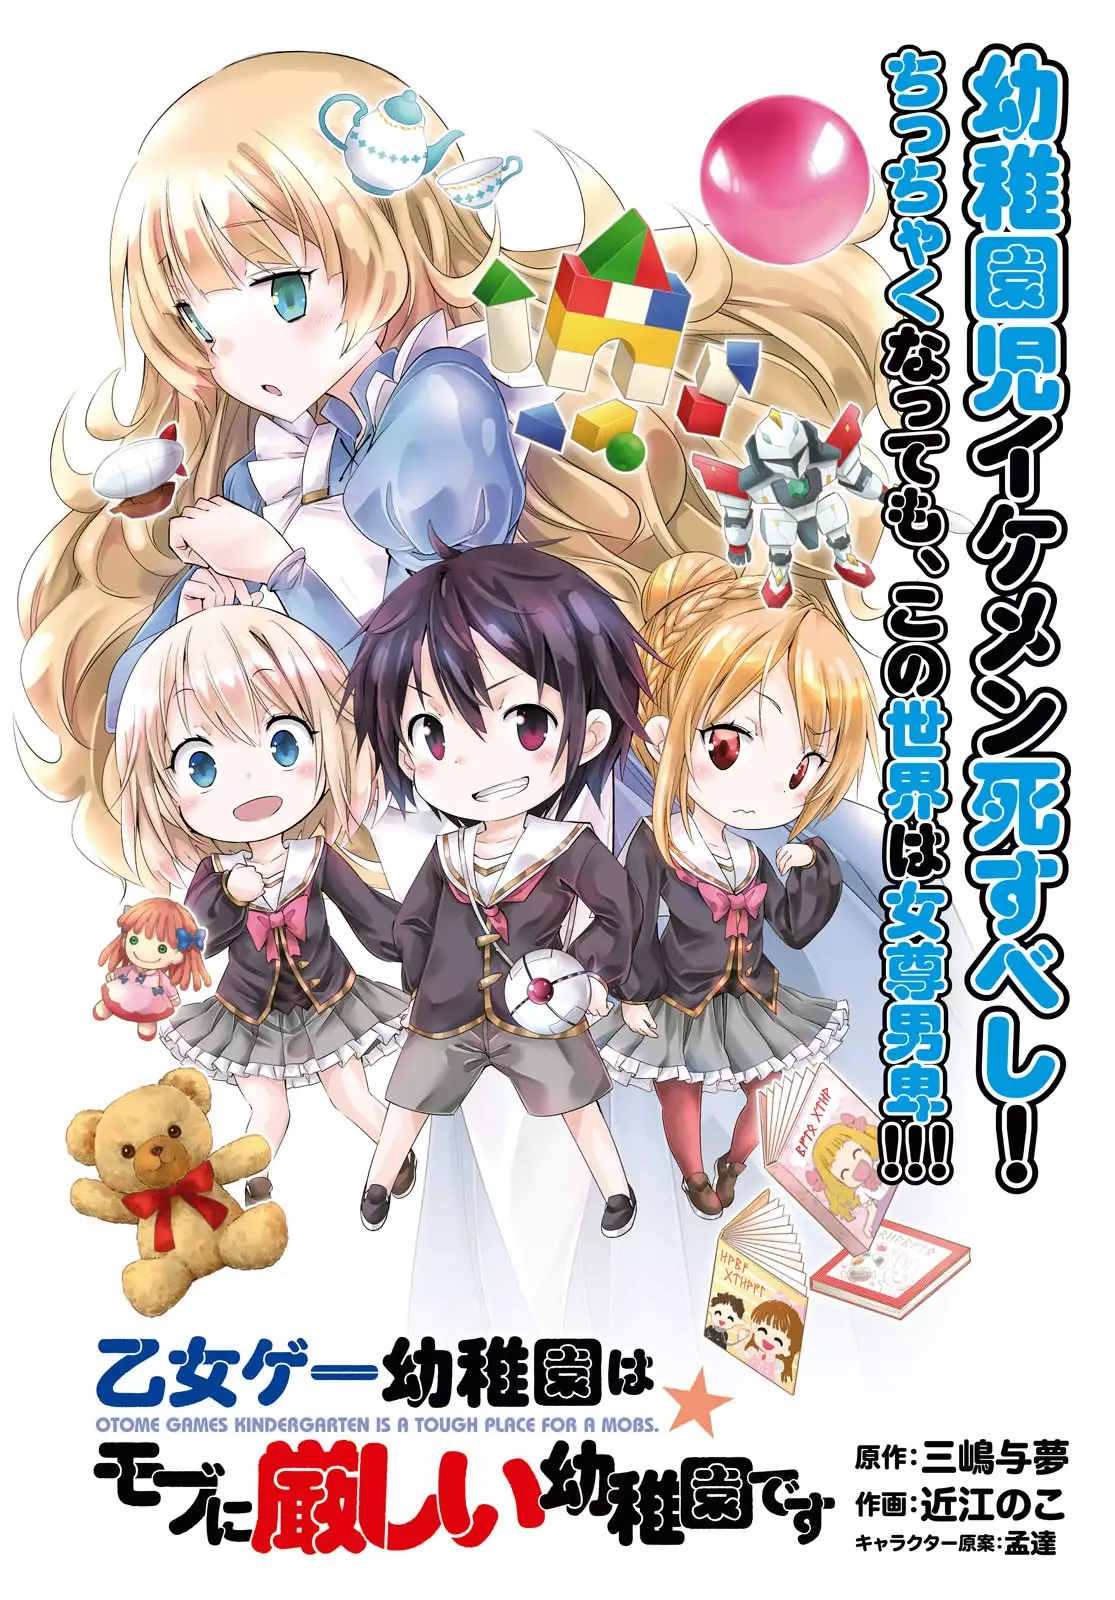 The World Of Otome Games Kindergarten Is Tough For Mobs - 1 page 3-b3670080